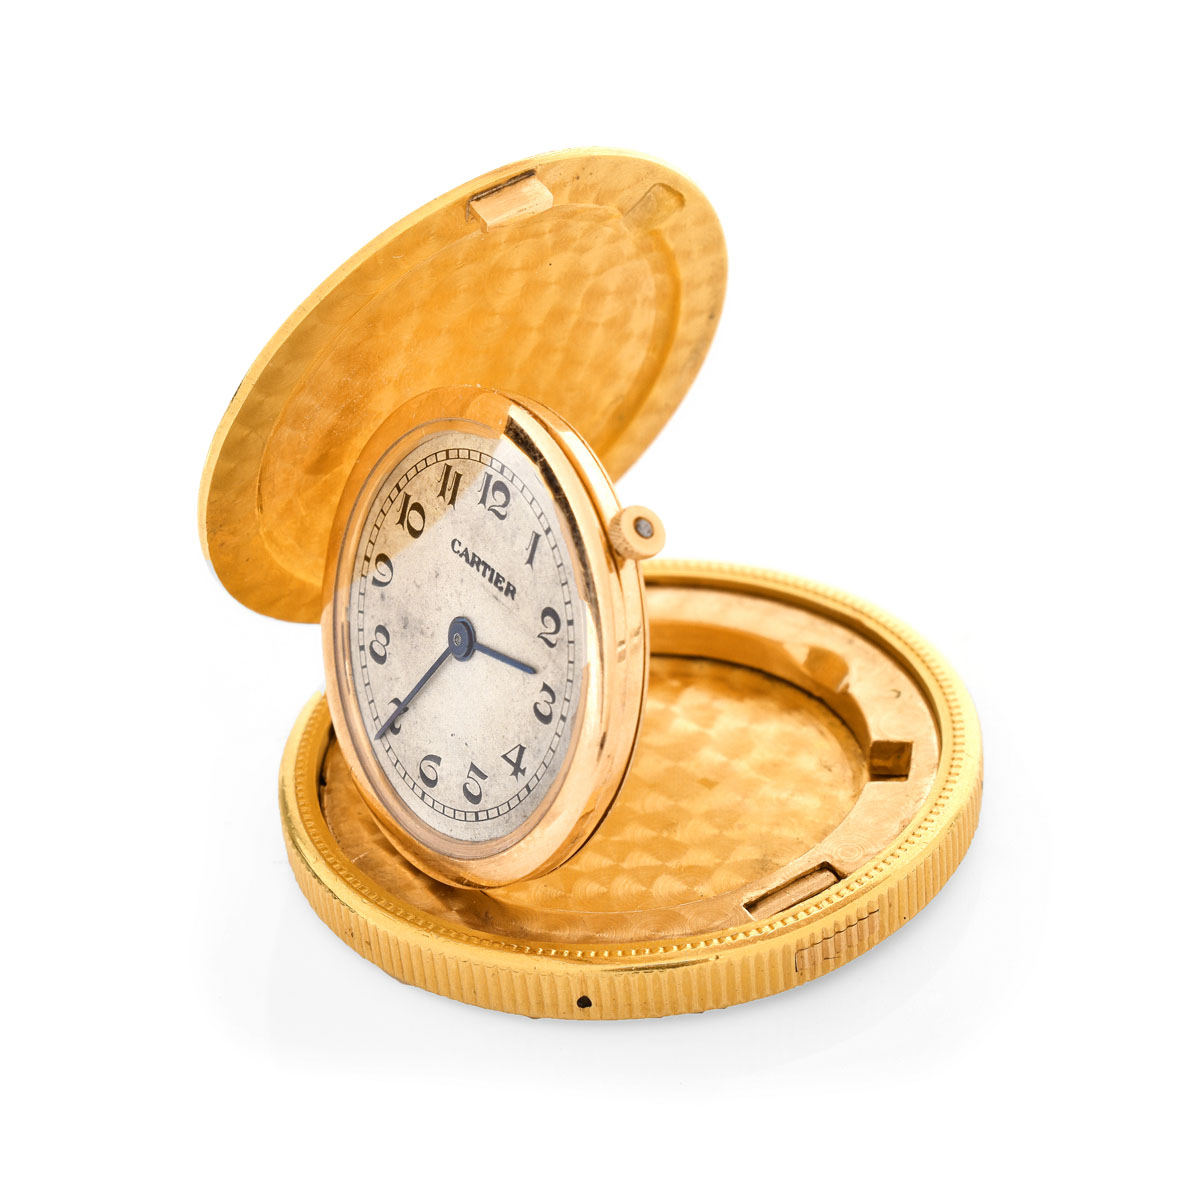 Rare and Very Fine Vintage Cartier 1906 US $20 Liberty Head Gold Coin Watch with Manual Movement. Signed to watch face, appears to be numbered to case back.